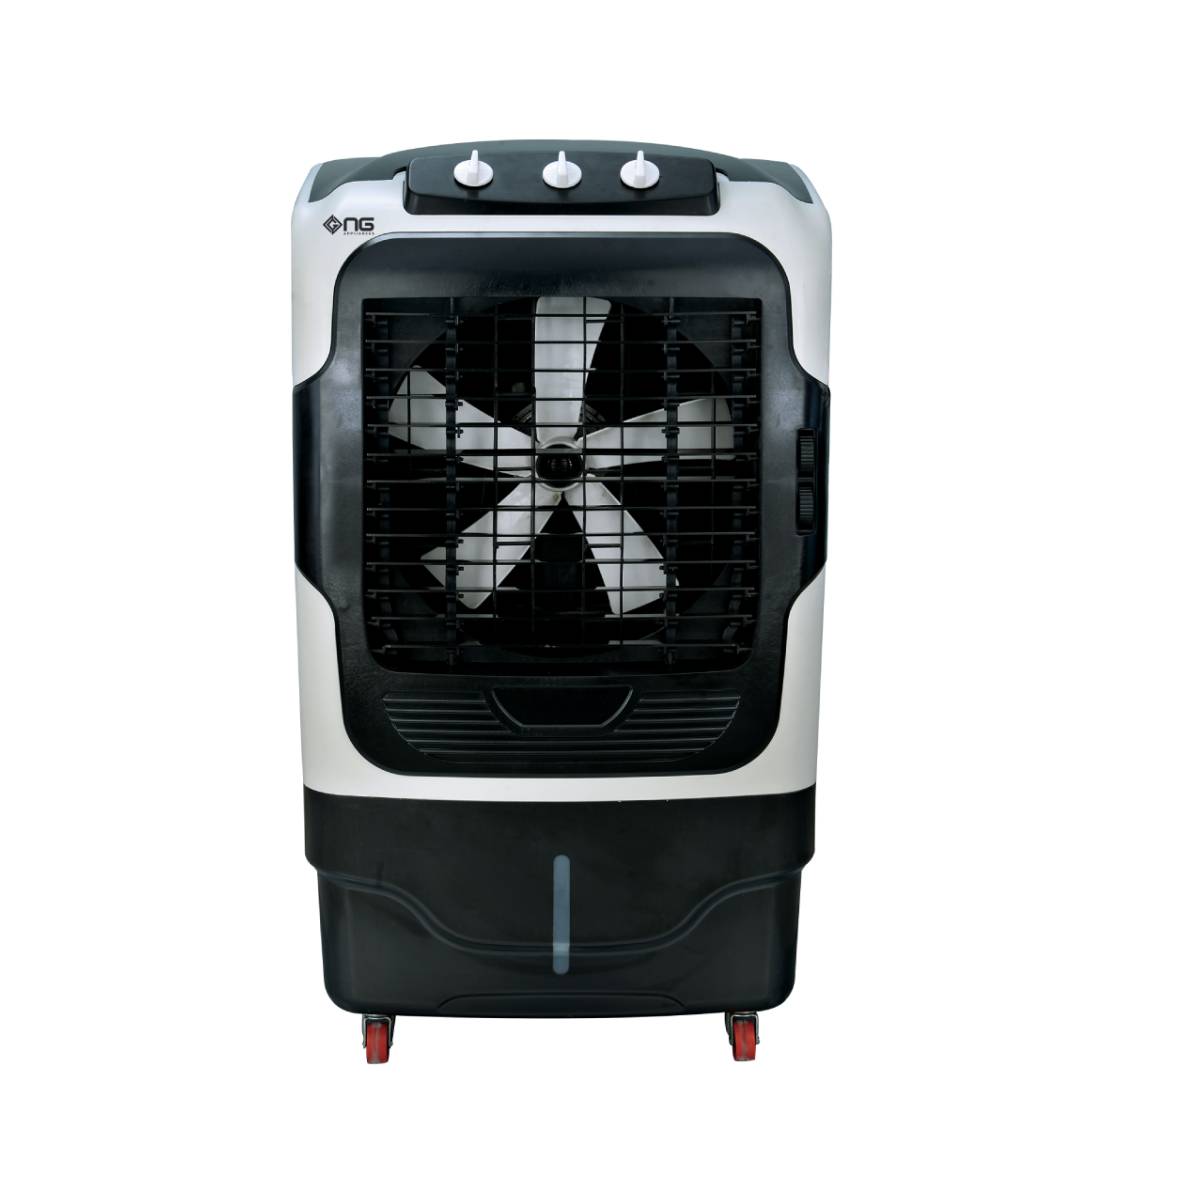 Nasgas Inverter Room Air Cooler Model NAC-9400 Unique & Stylish Design Cooling With Large Ice Box